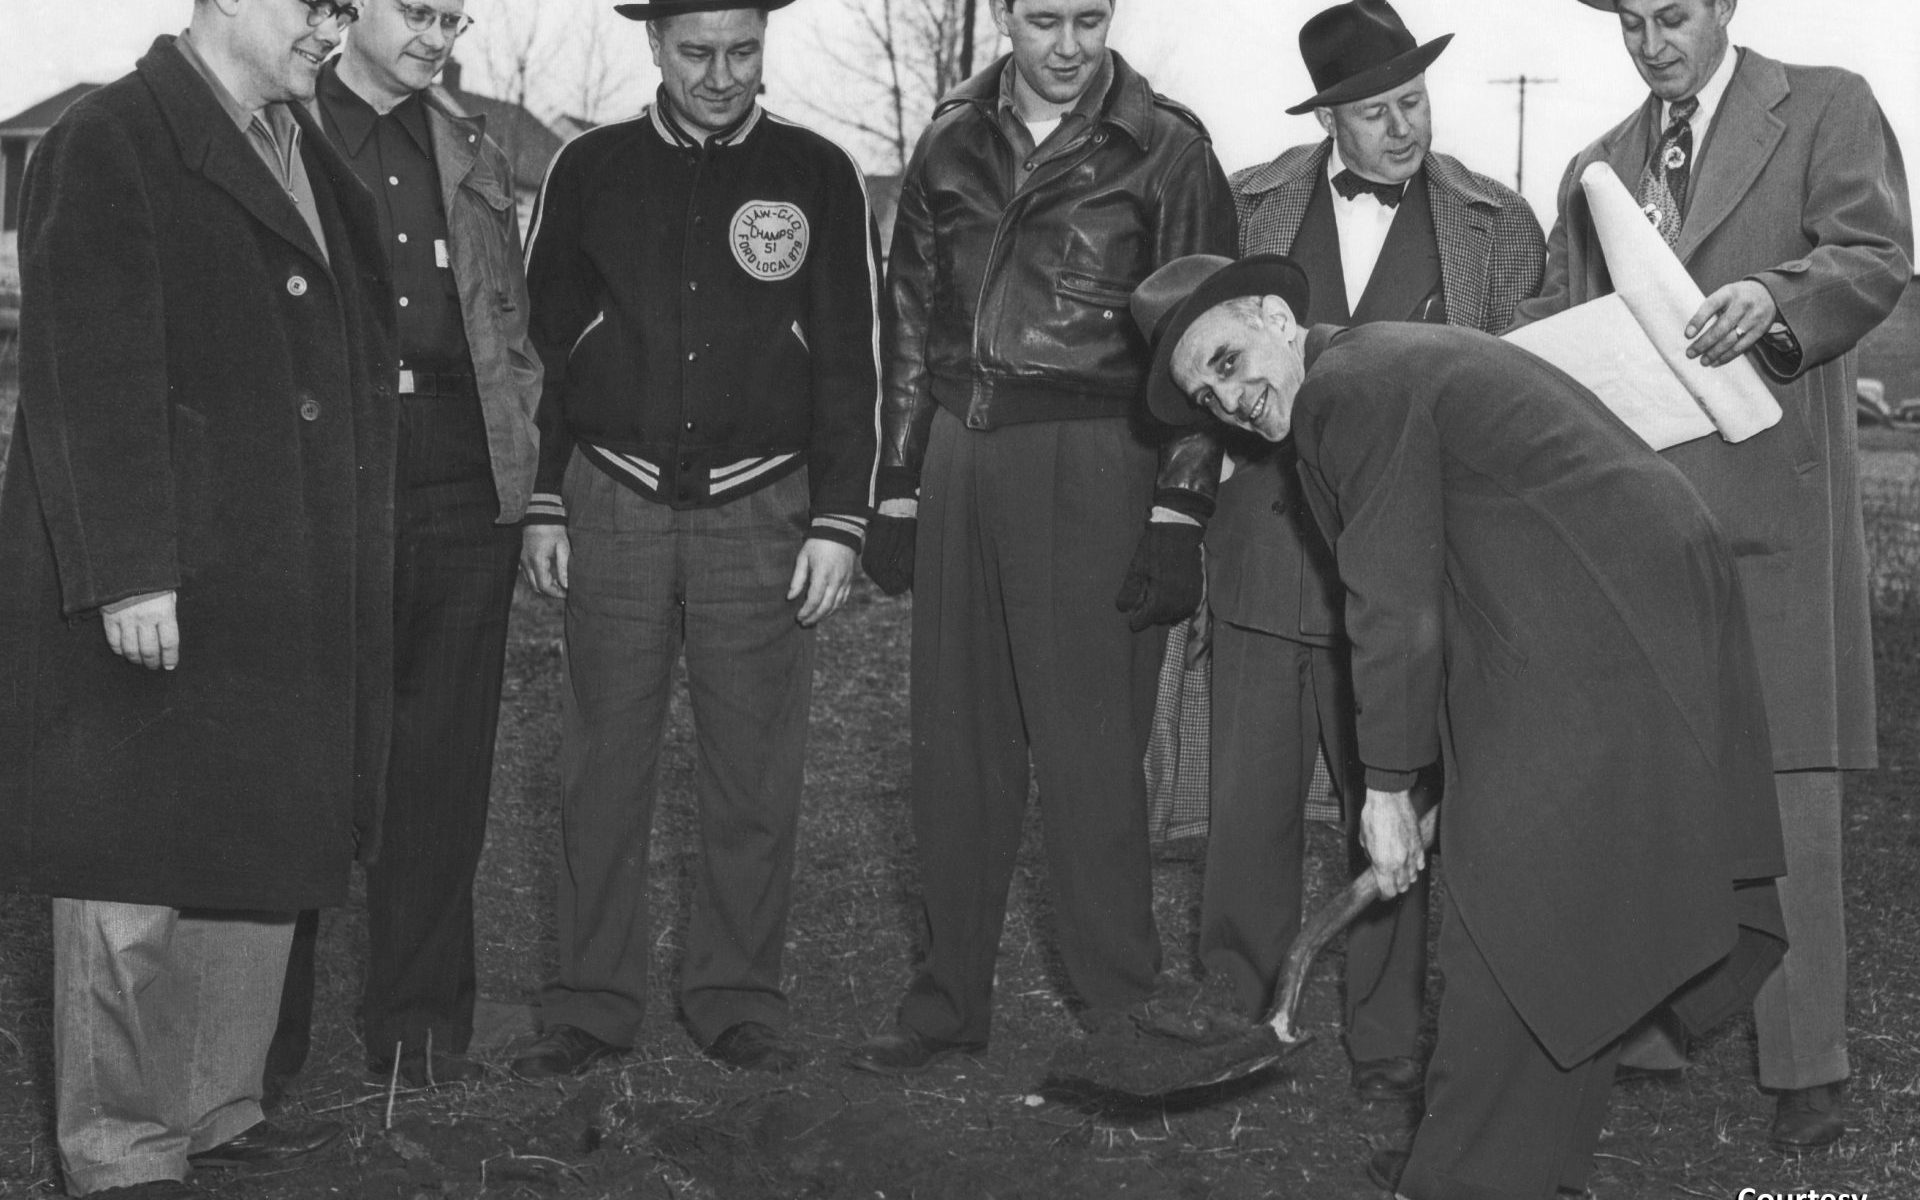 Leaders of the United Auto Workers Local 879 broke ground on the new UAW Union Hall on Ford Parkway in 1953. The building was later renamed in honor of Ray Busch, one of the early presidents of UAW Local 879. The site is currently occupied by Erik’s Bike Shop. Courtesy Brian McMahon